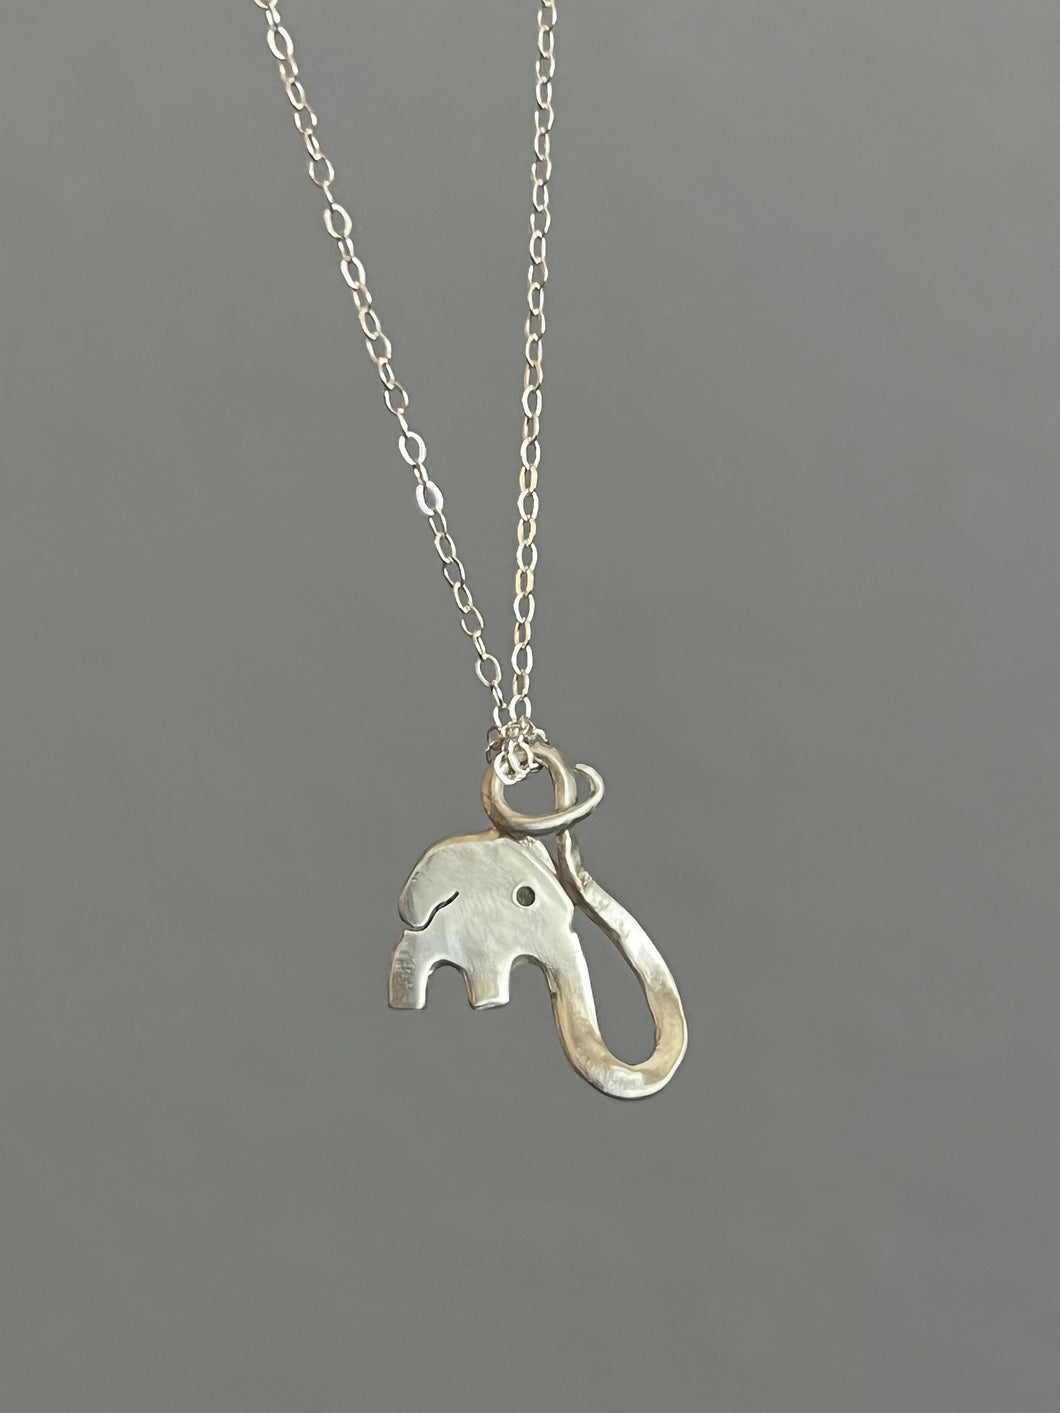 Fork Elephant Necklace - Sterling Silver - 21 Inches